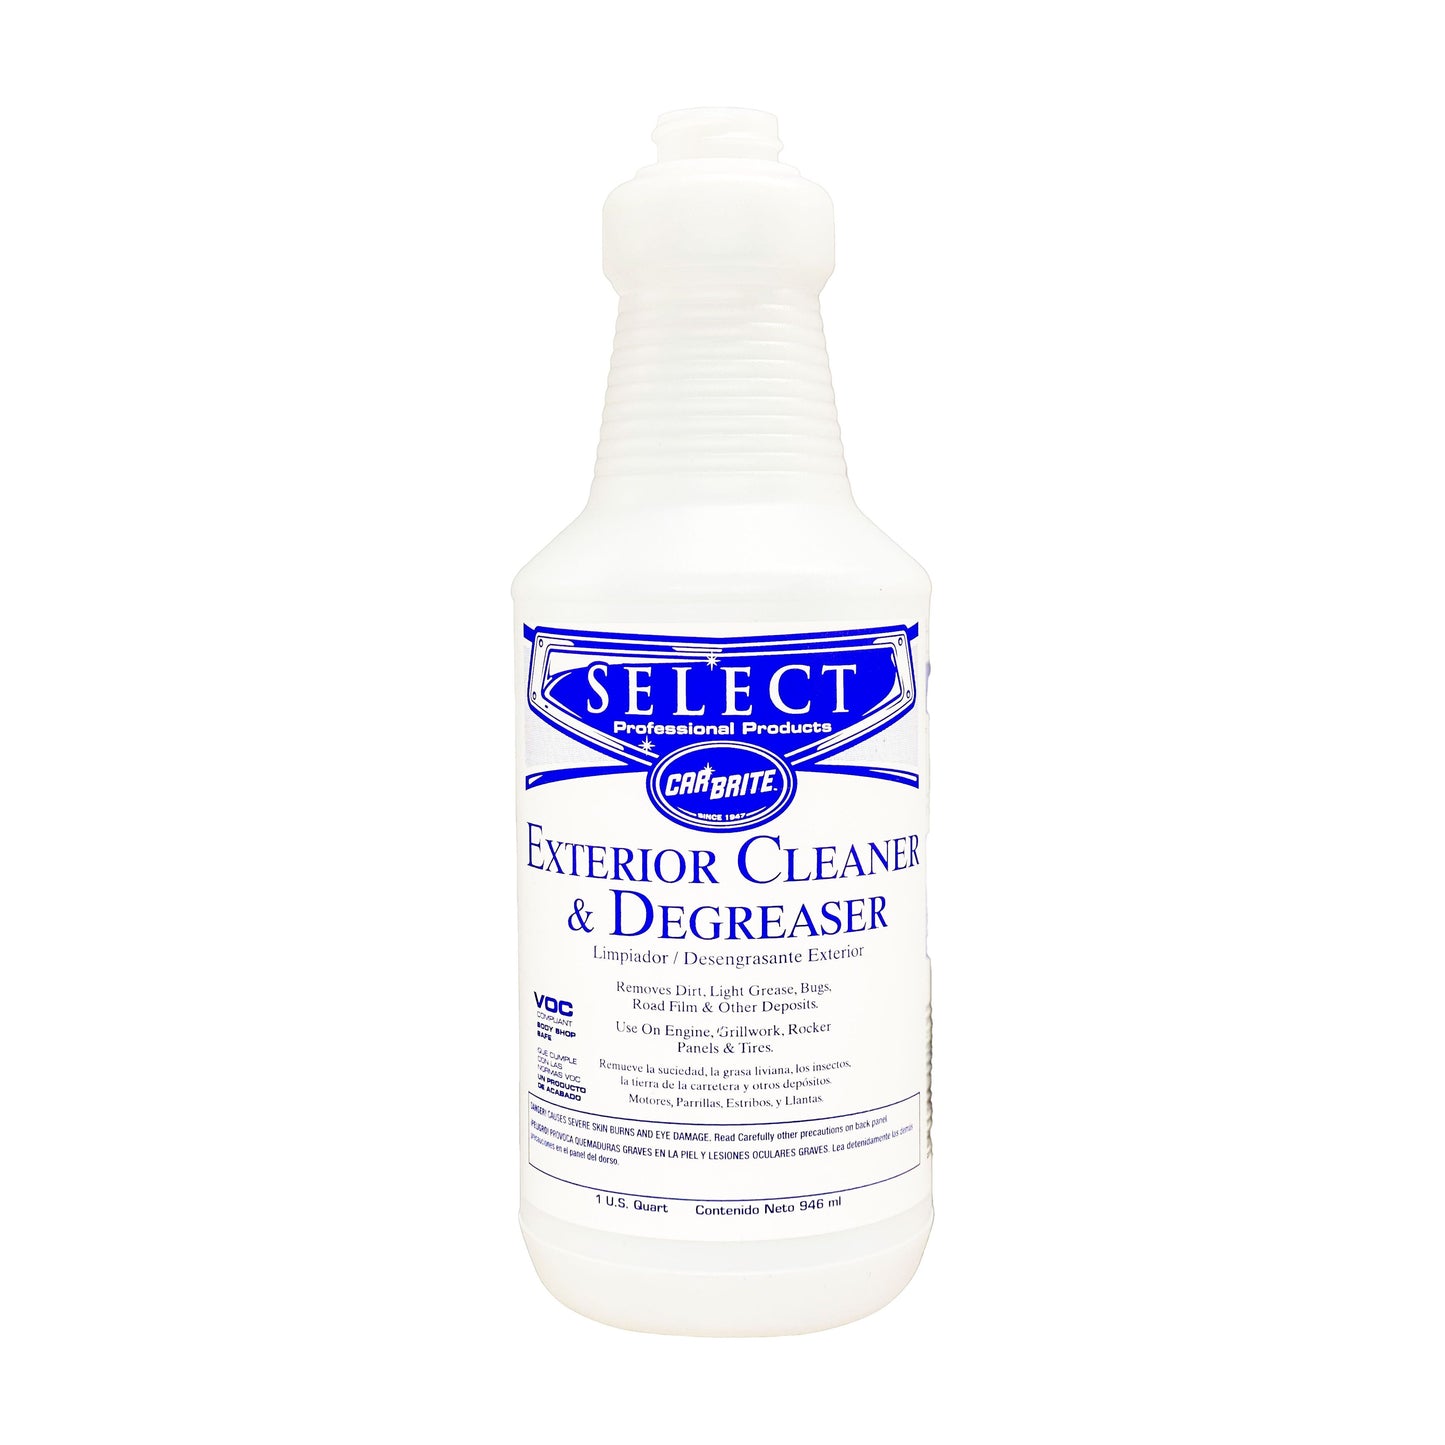 Select Exterior Cleaner & Degreaser